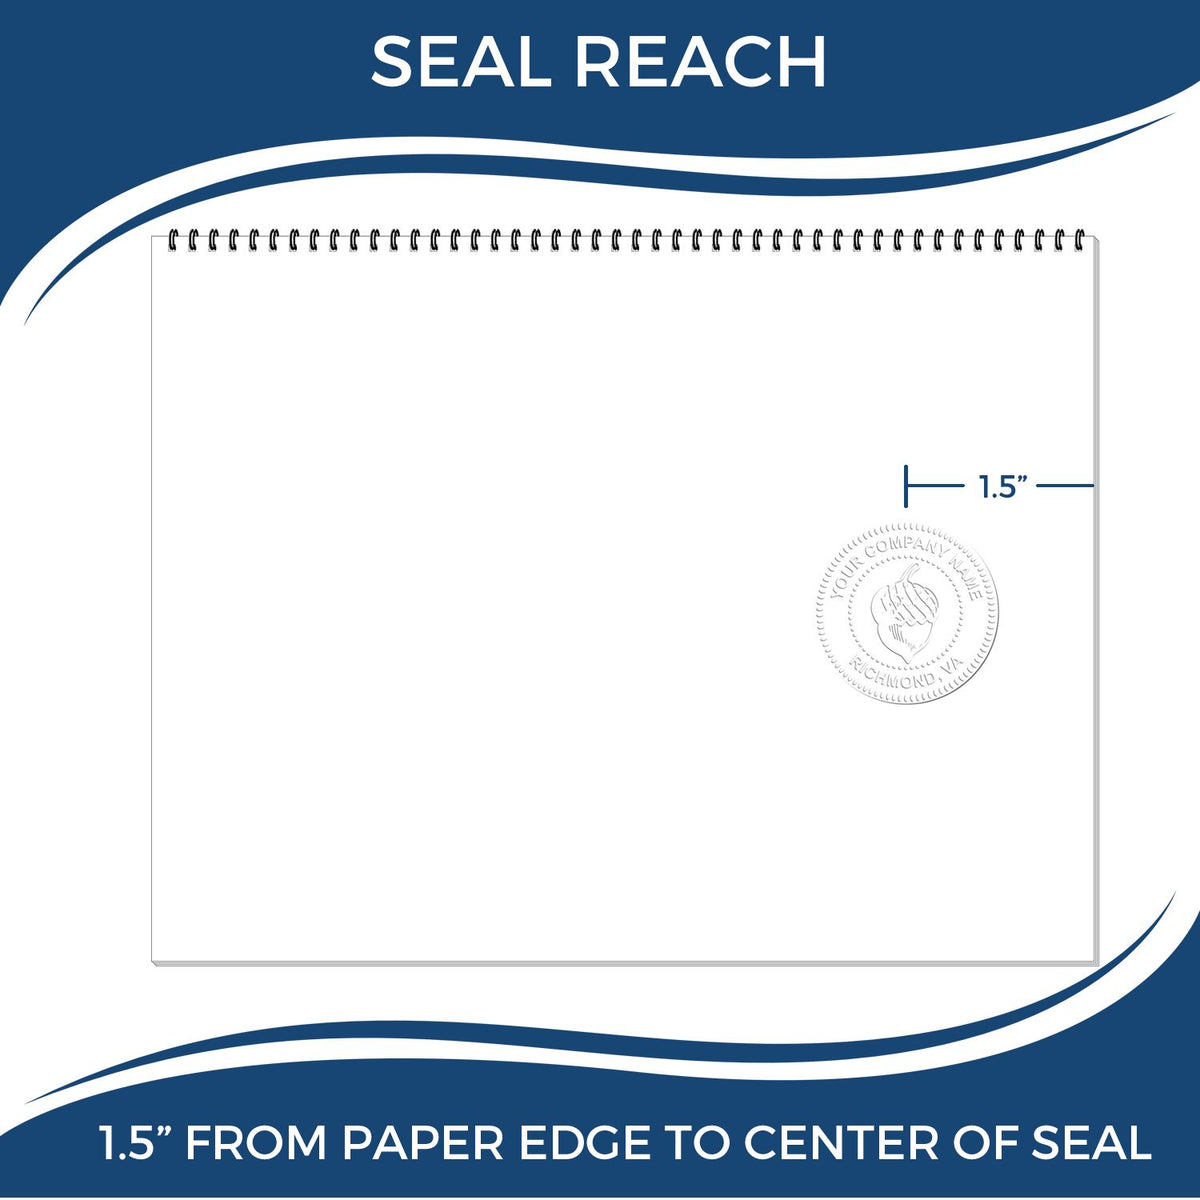 An infographic showing the seal reach which is represented by a ruler and a miniature seal image of the Missouri Geologist Desk Seal